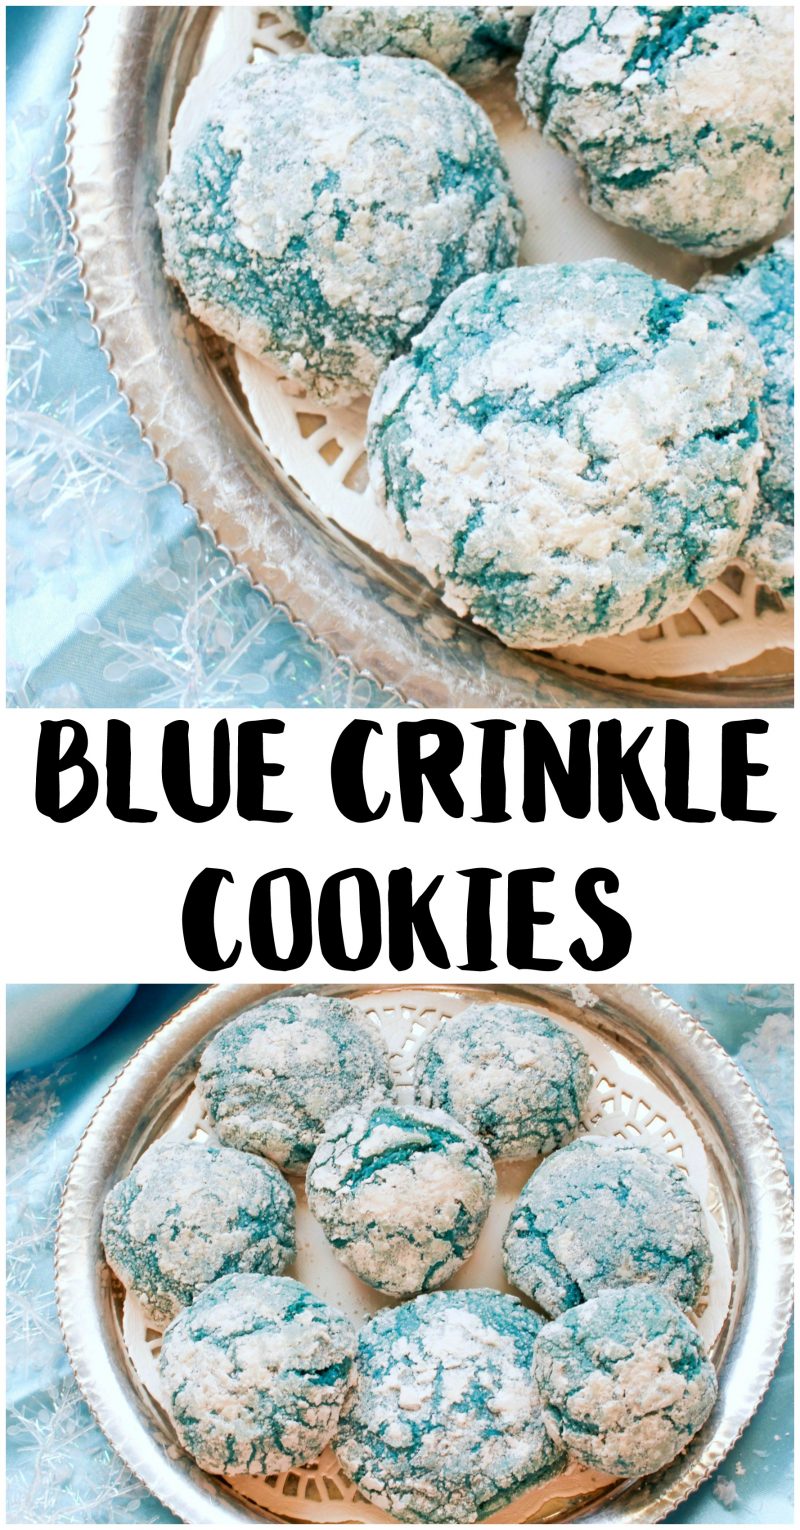 If you need recipes for the best cookie ideas, look no further. Whether you’re baking Christmas cookies for a cookie exchange or just trying to get the kids in the kitchen, these Blue Crinkle Cookies are perfect! They are delicious, easy, and unique- and they look like Queen Elsa herself decorated them!